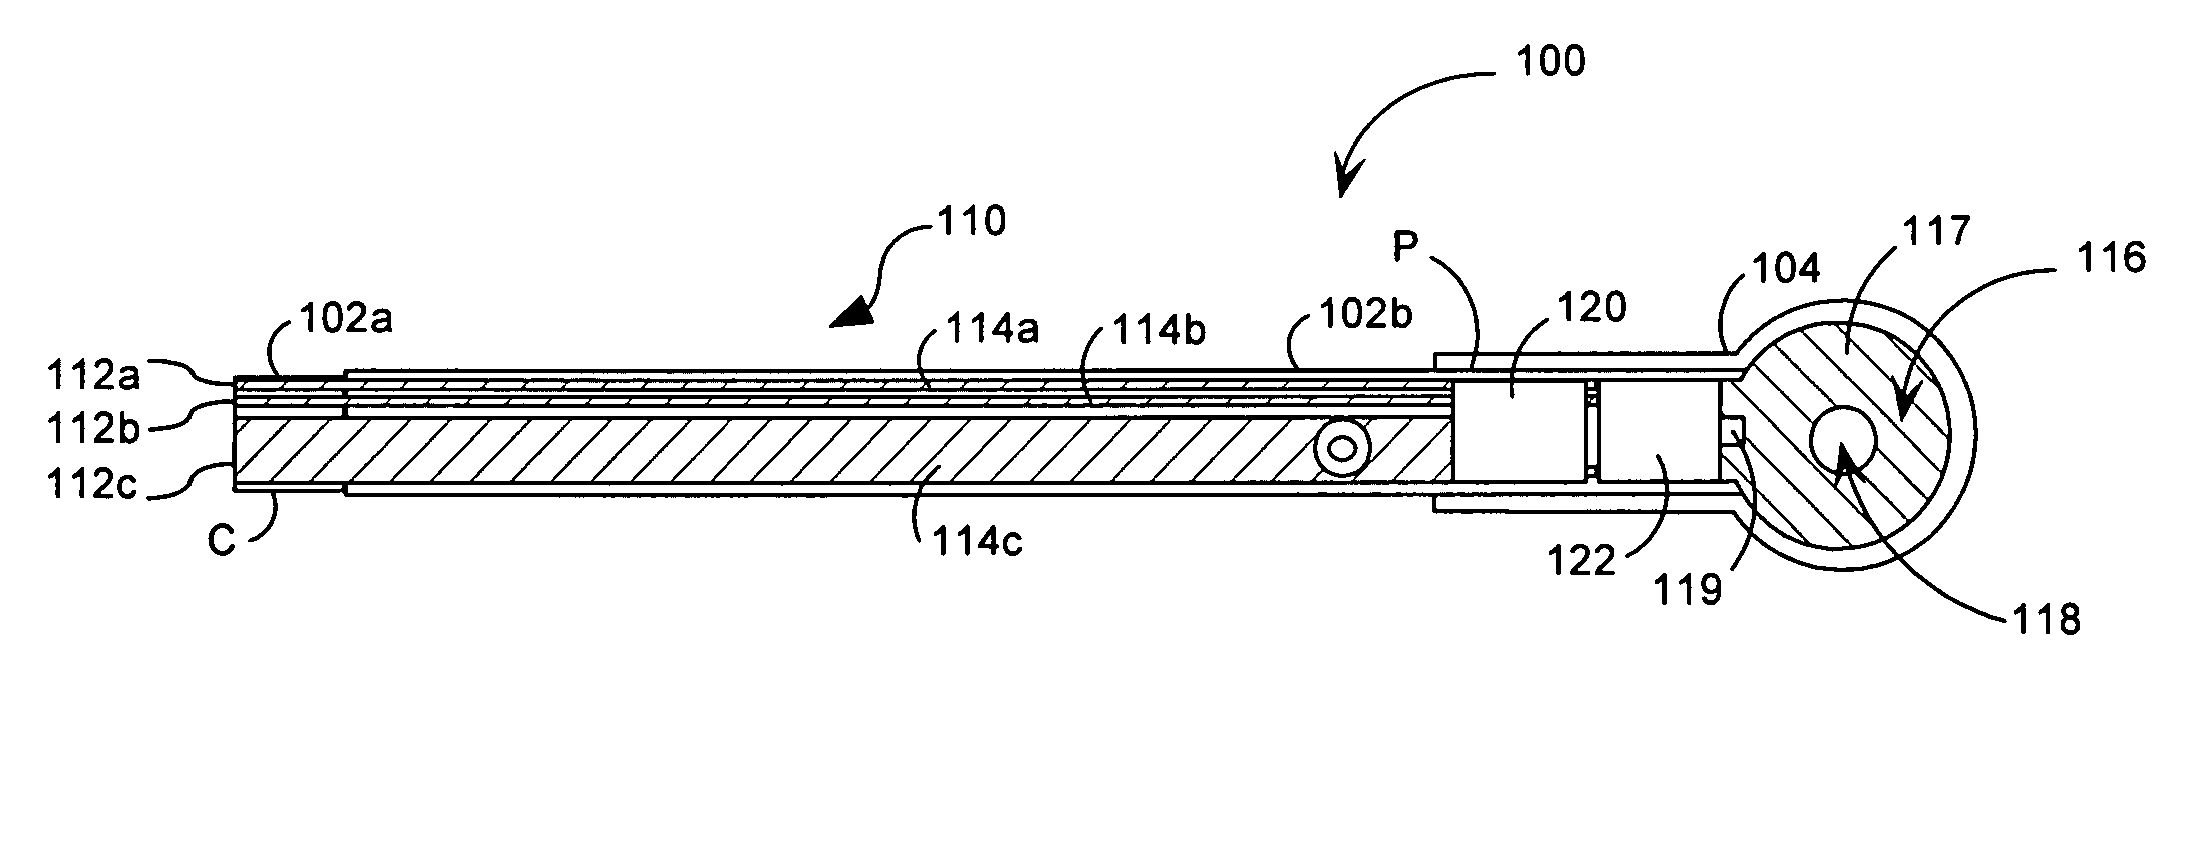 Flexible circuit temperature sensor assembly for flanged mounted electronic devices